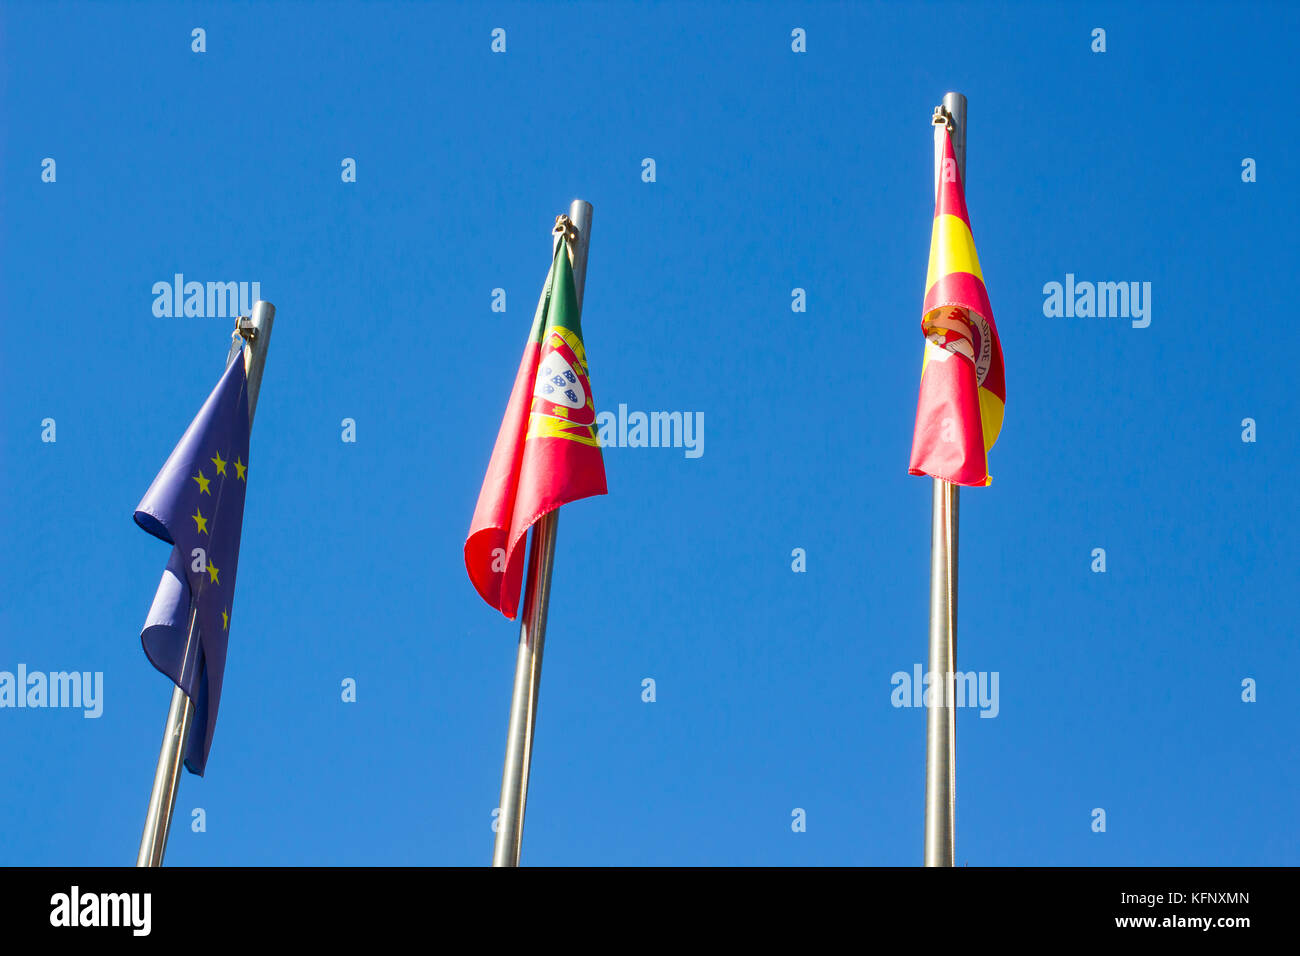 Two Portuguese Flags and a European Flag hang in the still air of a calm day outside a hotel in Albuferia in Portugal Stock Photo